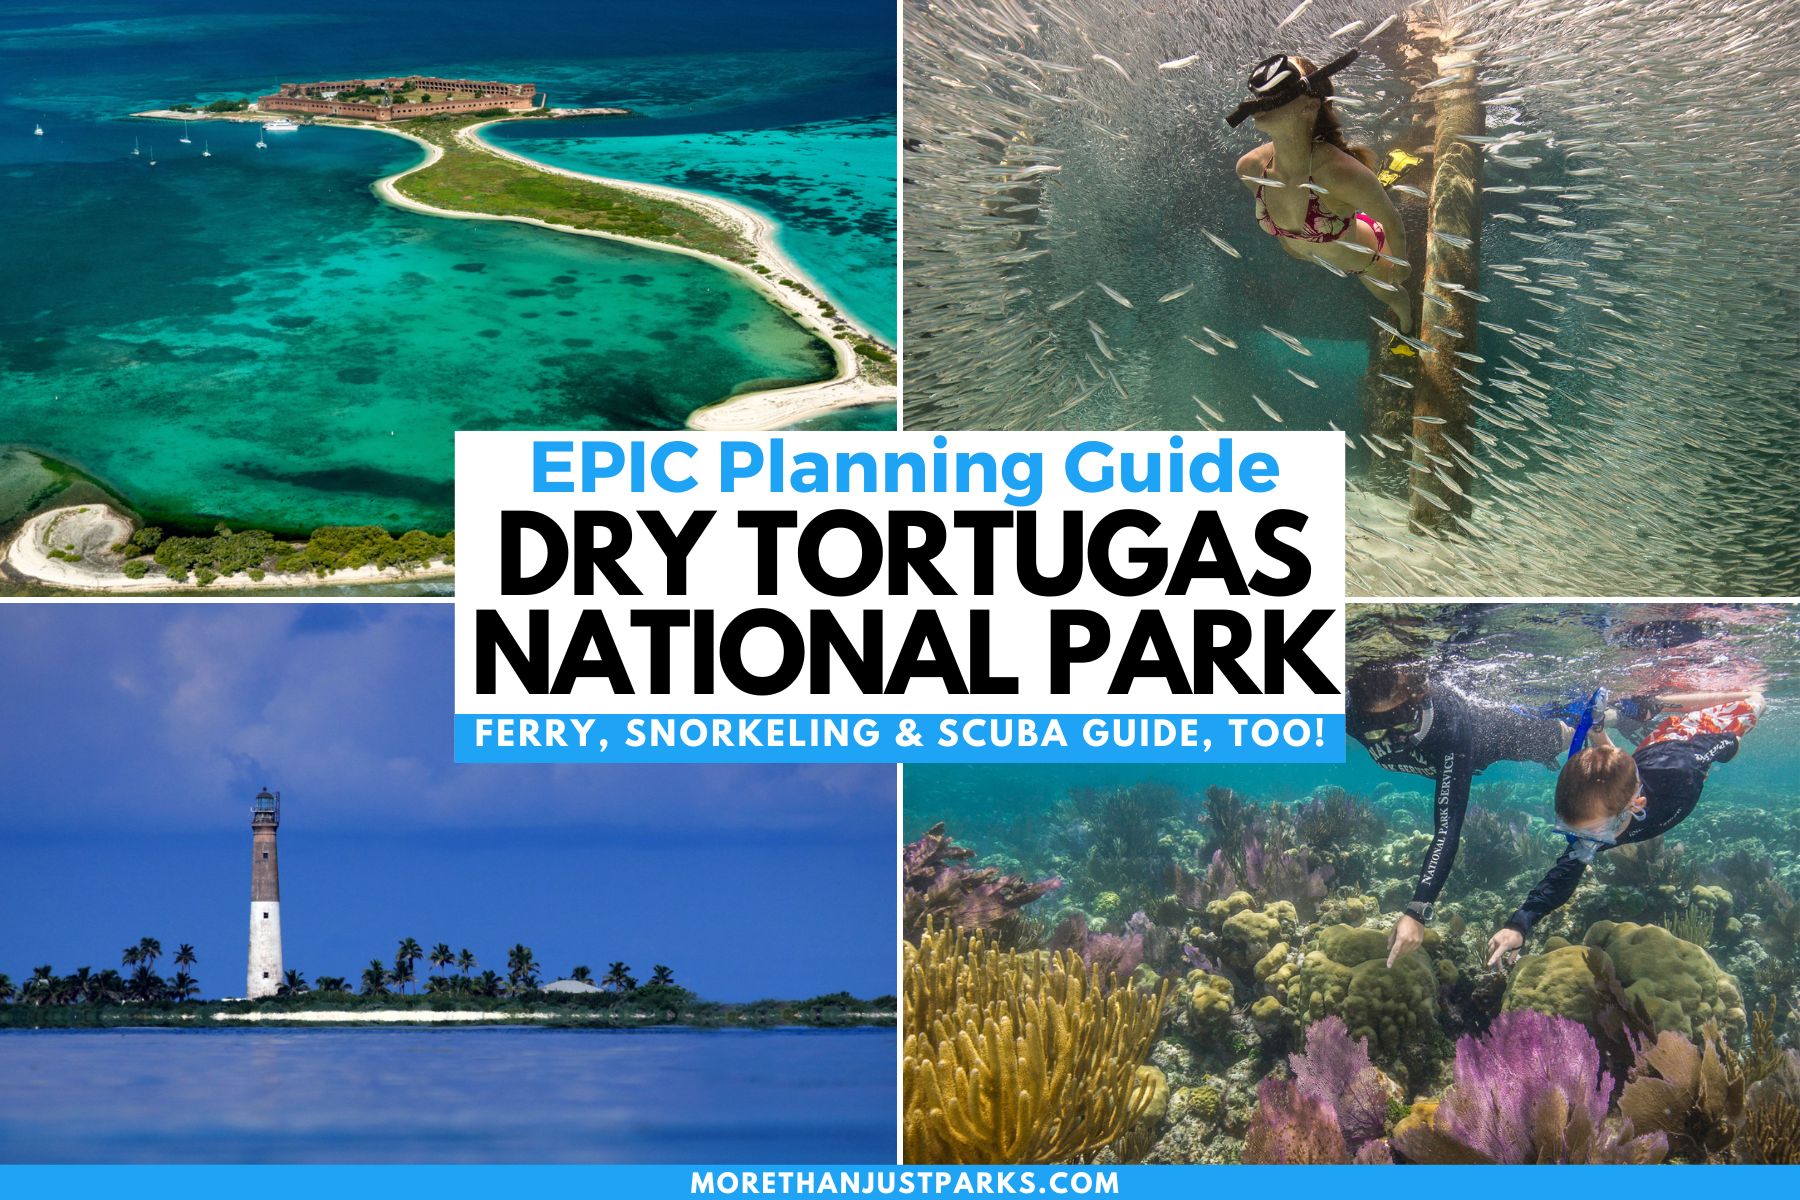 Epic Planning Guide for Dry Tortugas National Park. Ferry, Snorkeling & Scuba Guide, Too.